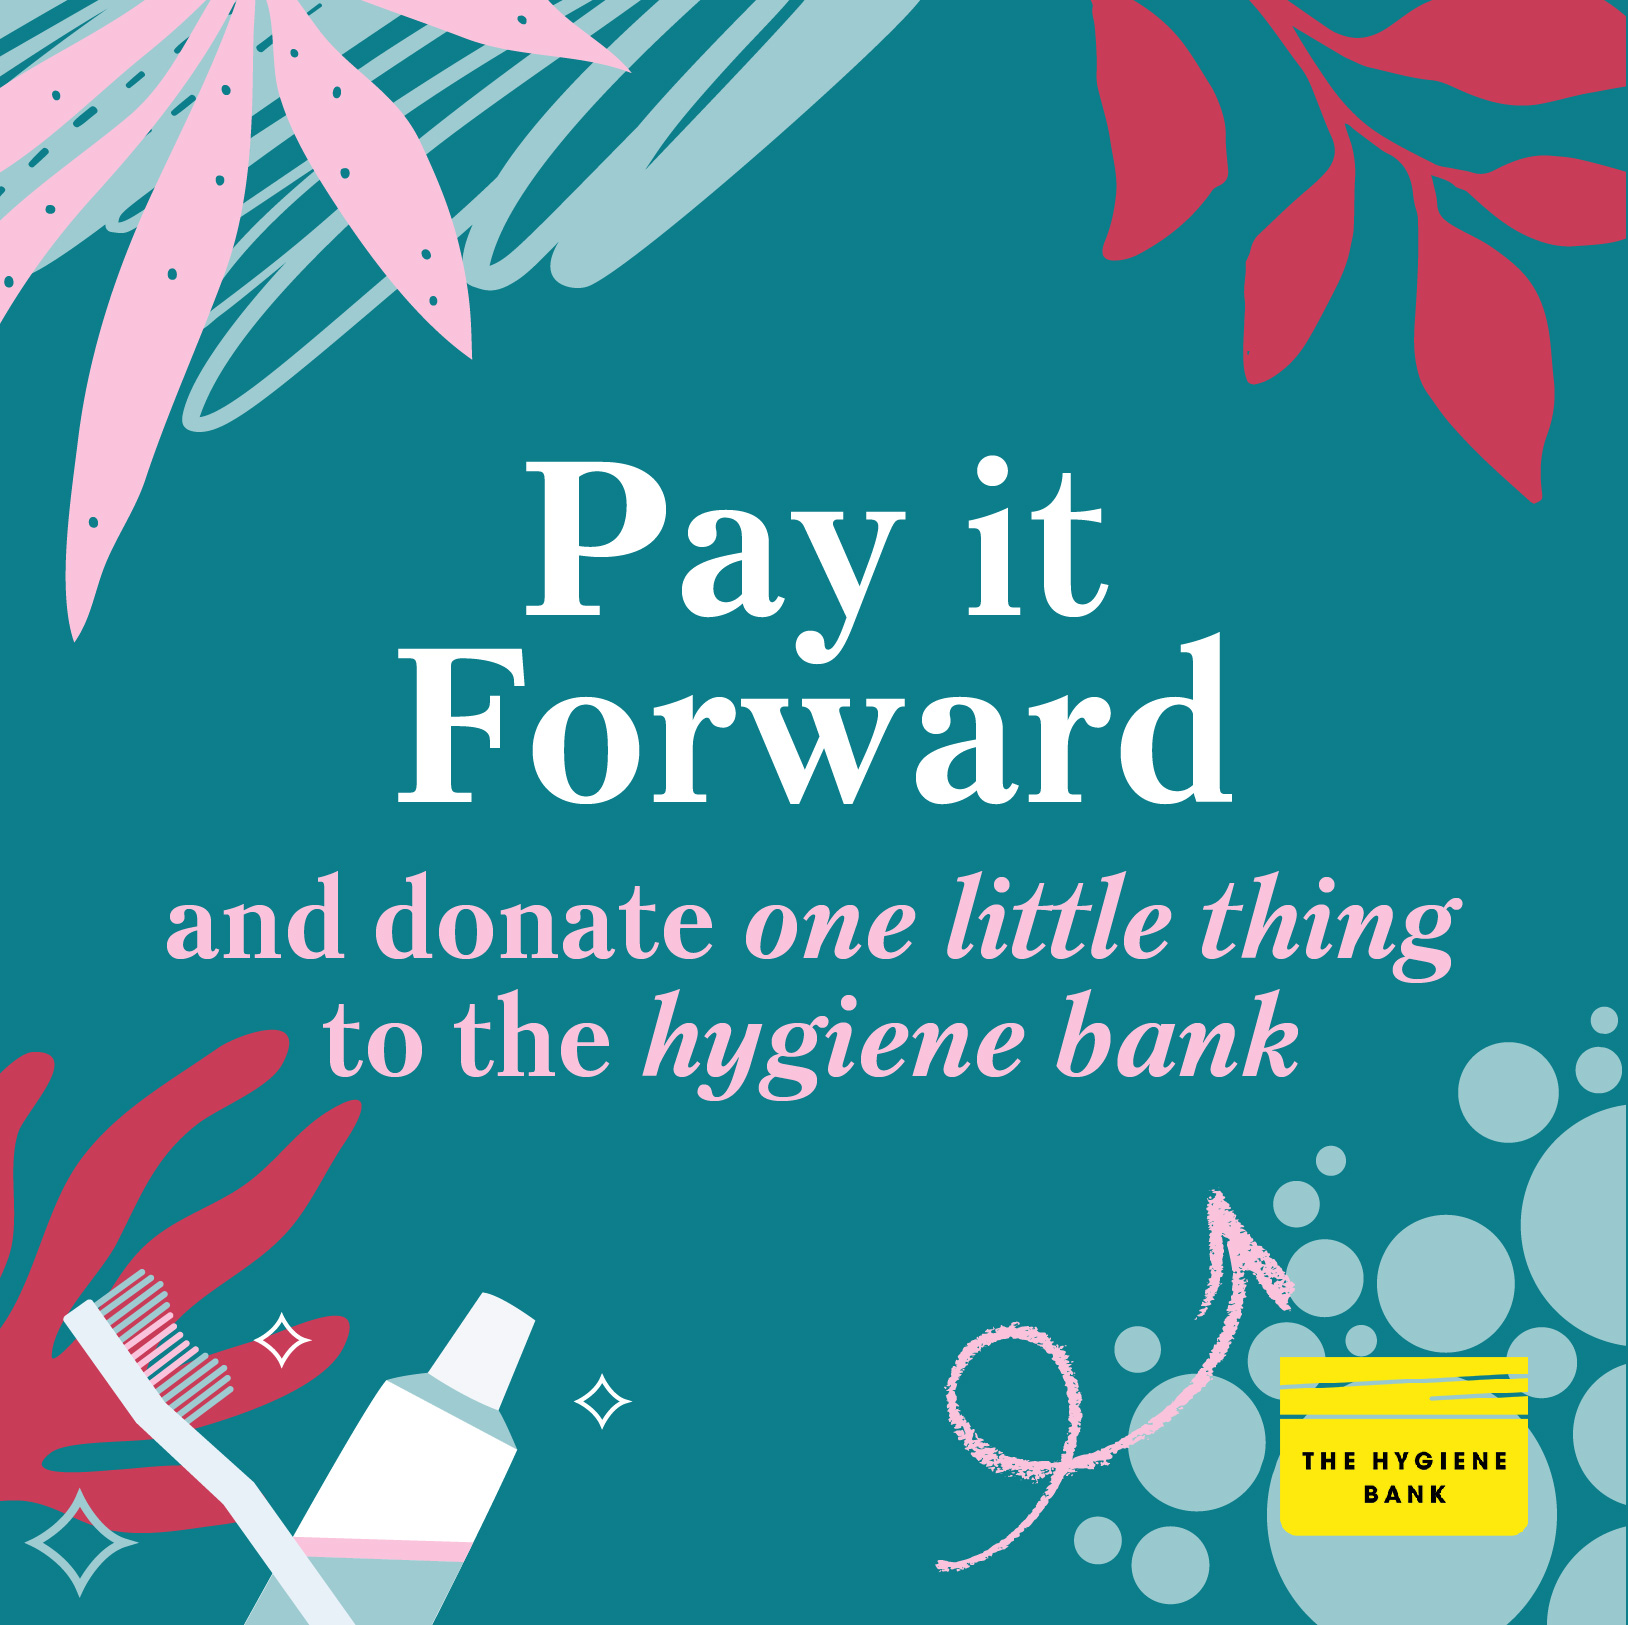 PAY IT FORWARD AND DONATE ONE LITTLE THING TO THE HYGIENE BANK